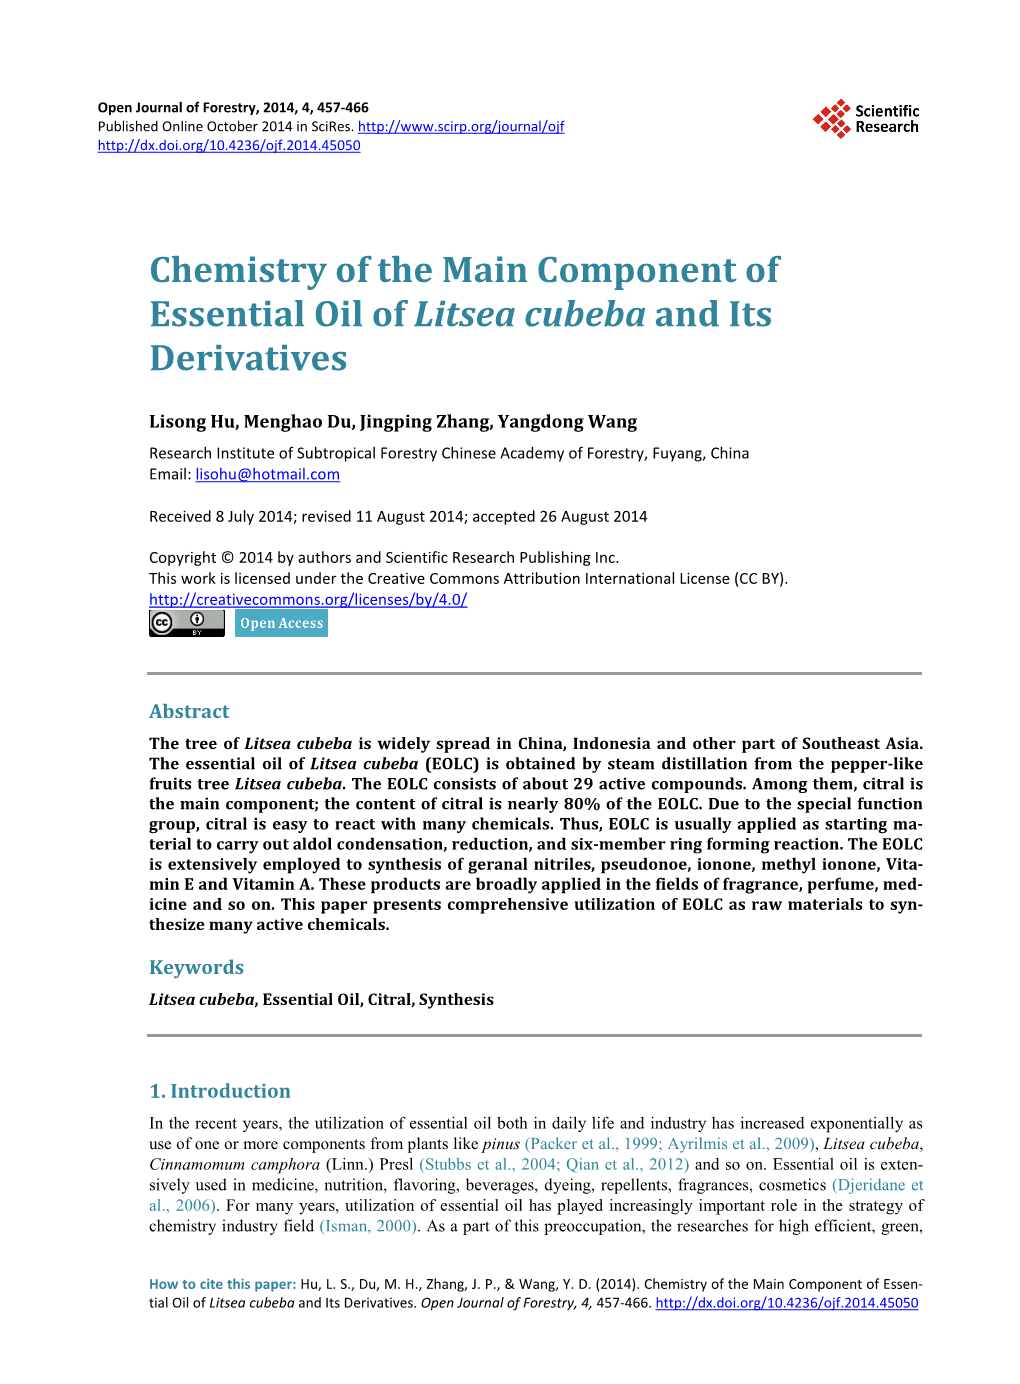 Chemistry of the Main Component of Essential Oil of Litsea Cubeba and Its Derivatives